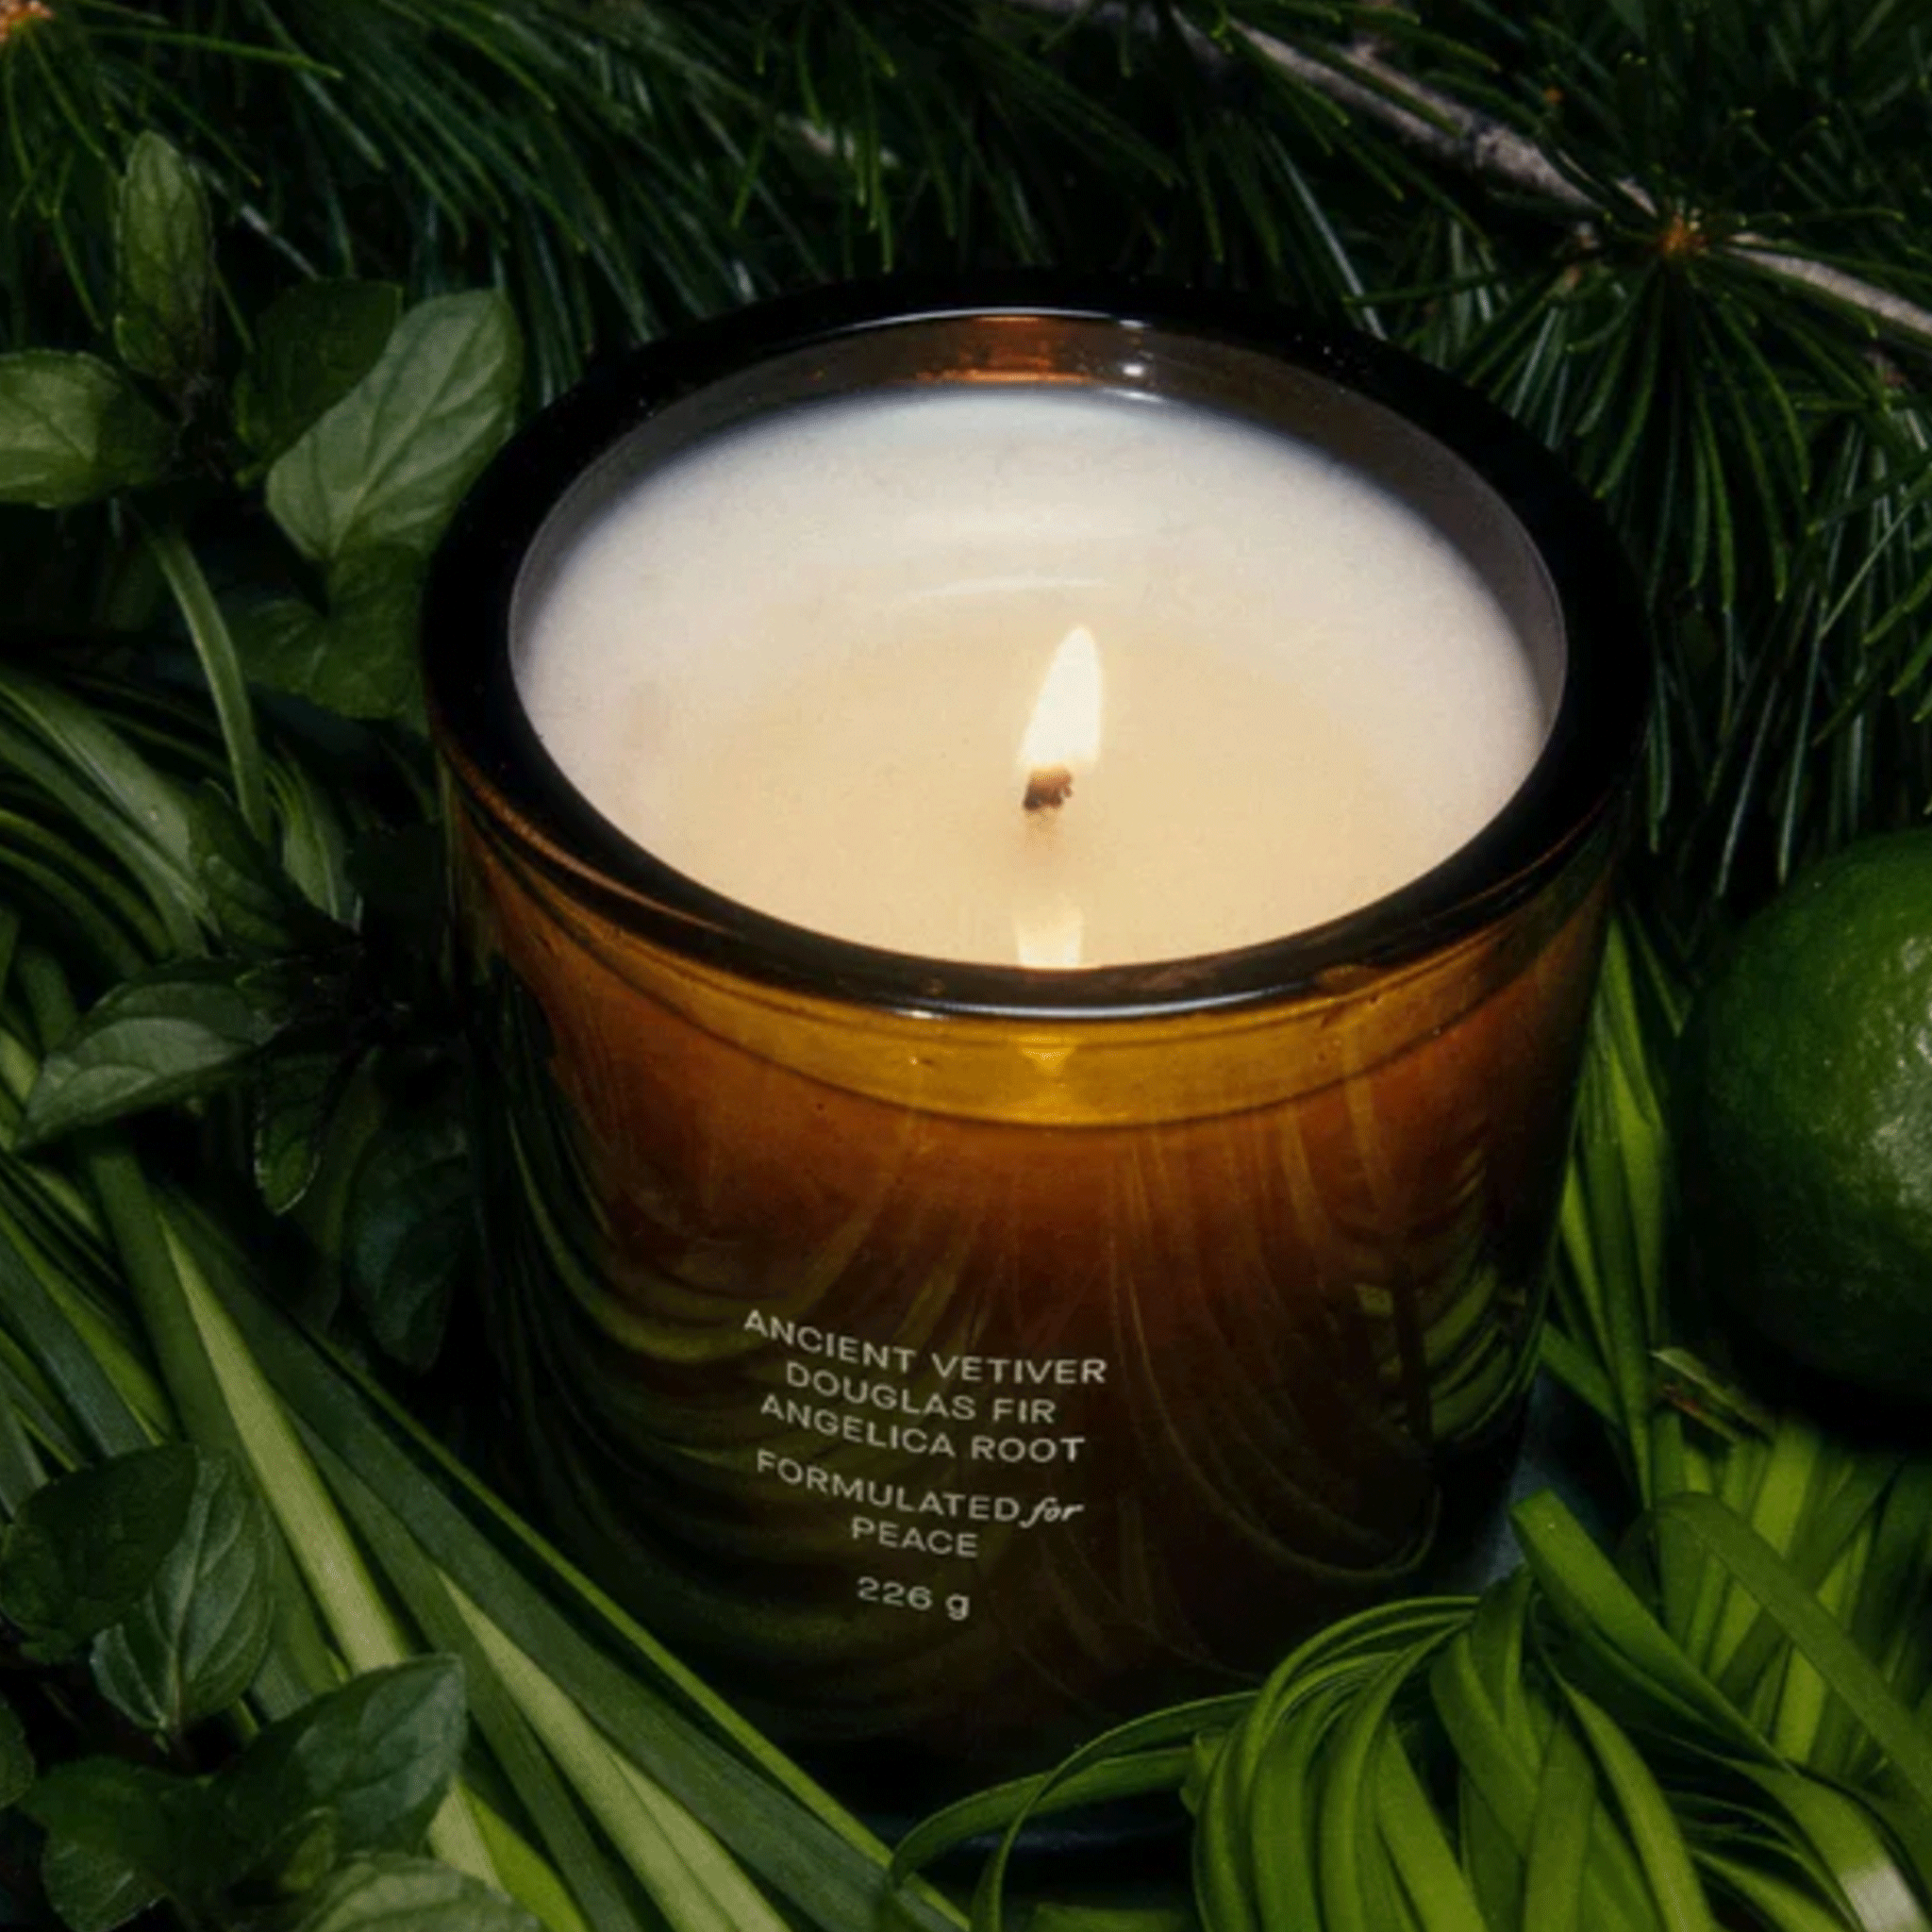 A green glass candle surrounded by basil leaves, fir stems and greenery. 